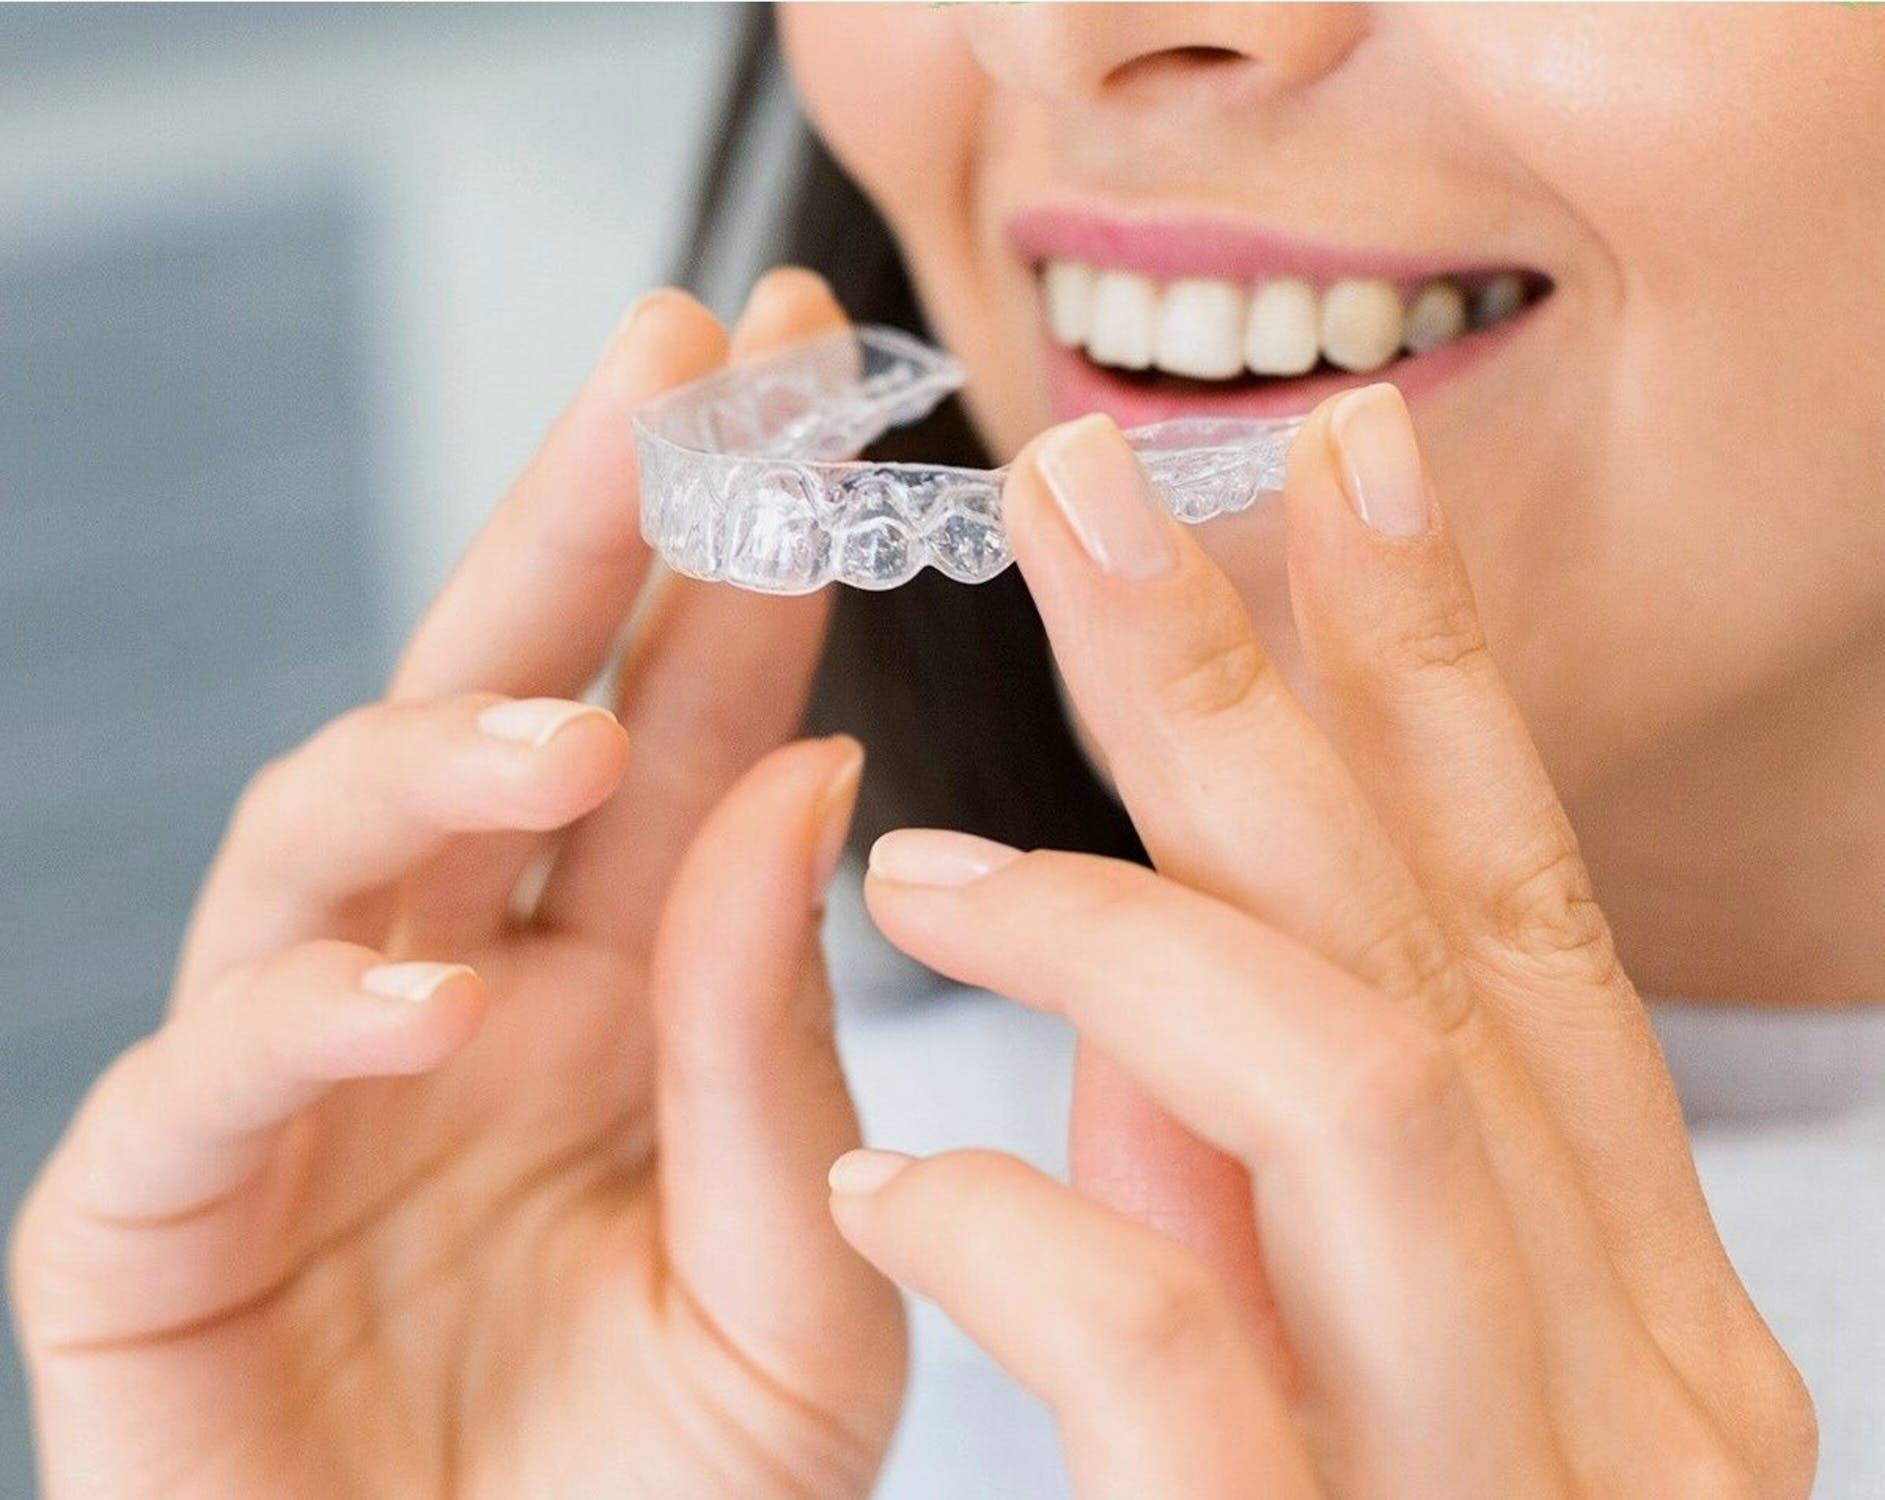 Tips on Keeping Healthy Teeth While Wearing Invisalign